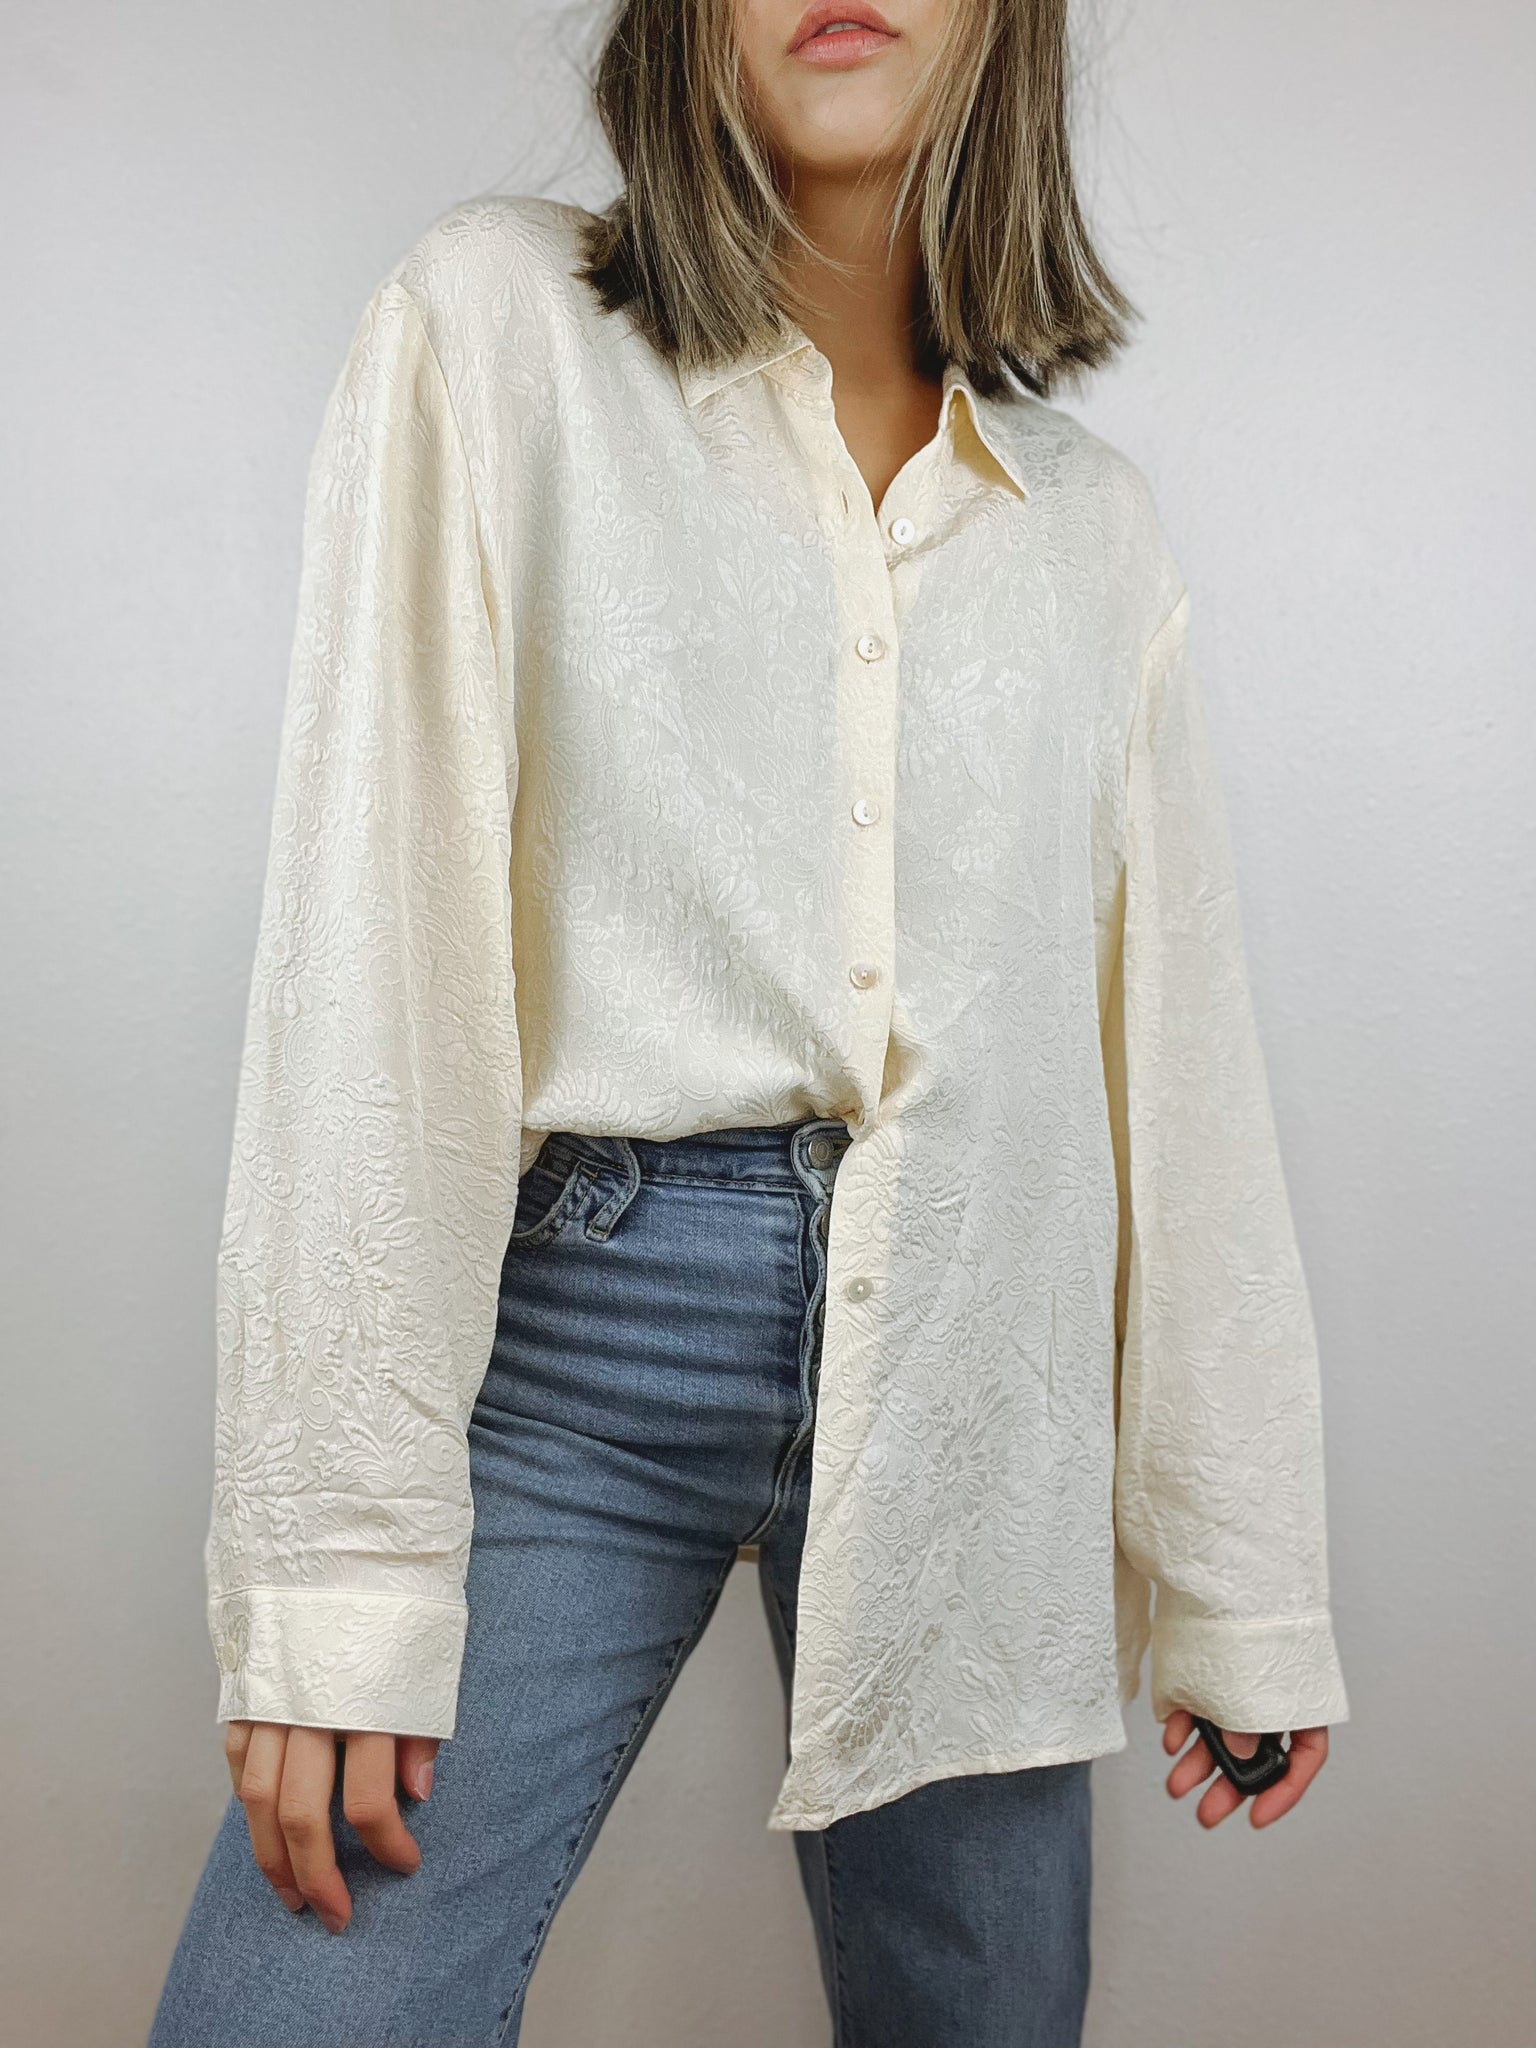 Silk Embossed Floral Button Up Top